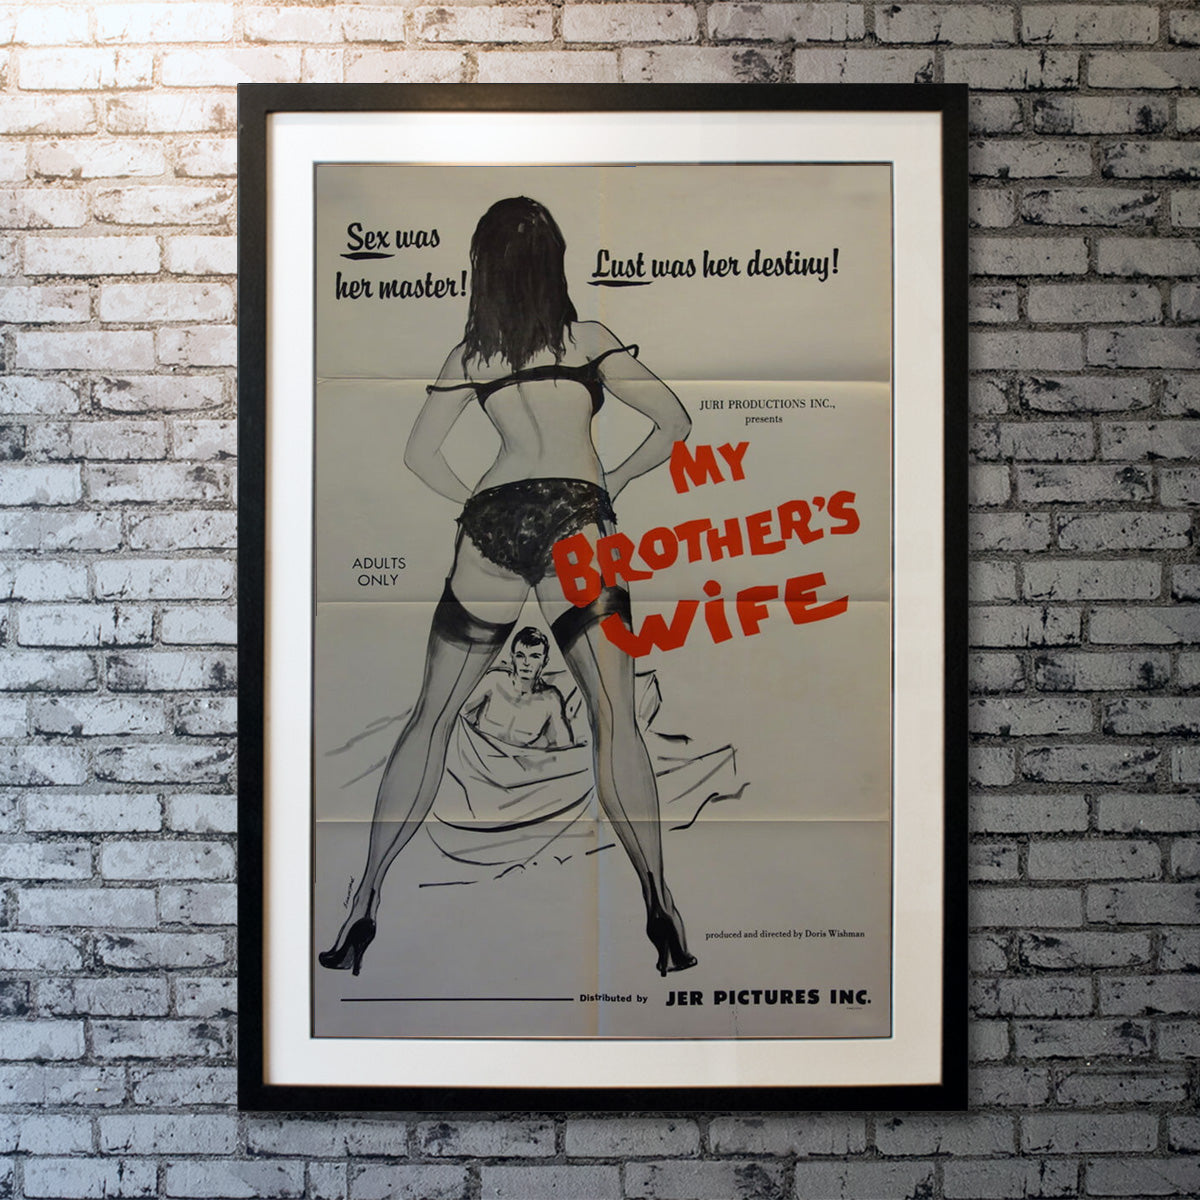 My Brothers Wife (1966) Original Movie Poster Vintage Film Poster